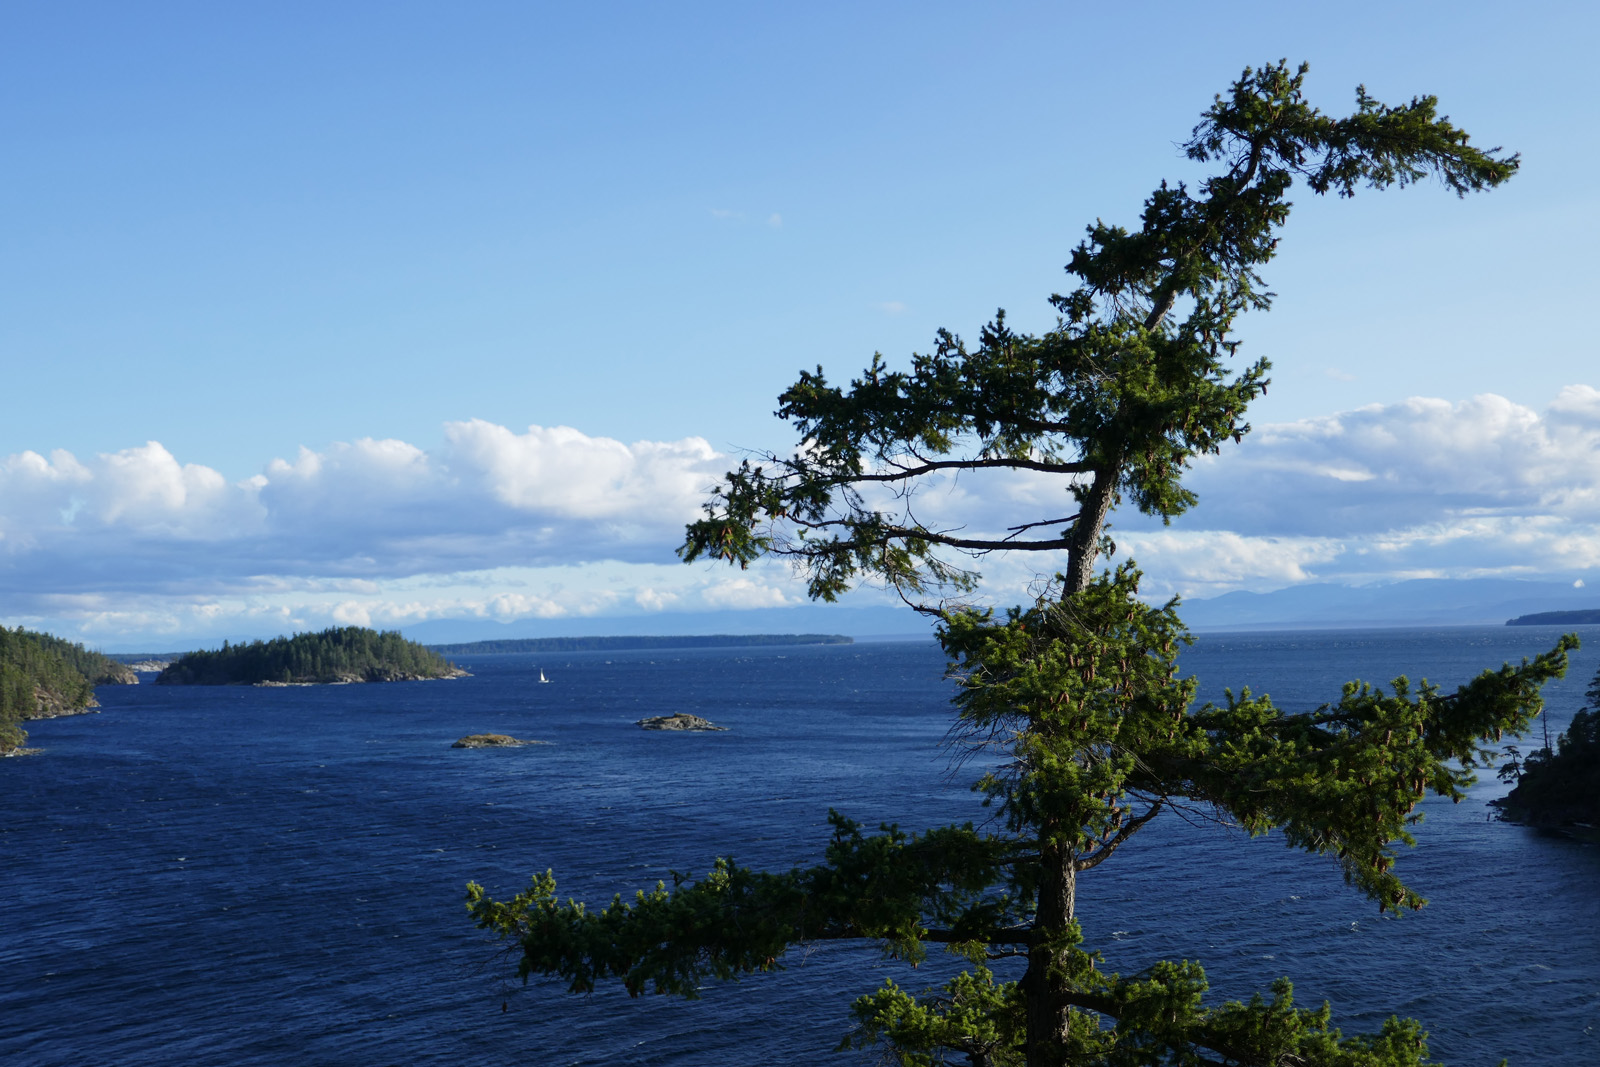   Douglas Fir Tree, Across from the Copeland Islands, Thulin Passage, British Columbia, Canada.   Reach for the sky with ambitious nature-based solutions. 